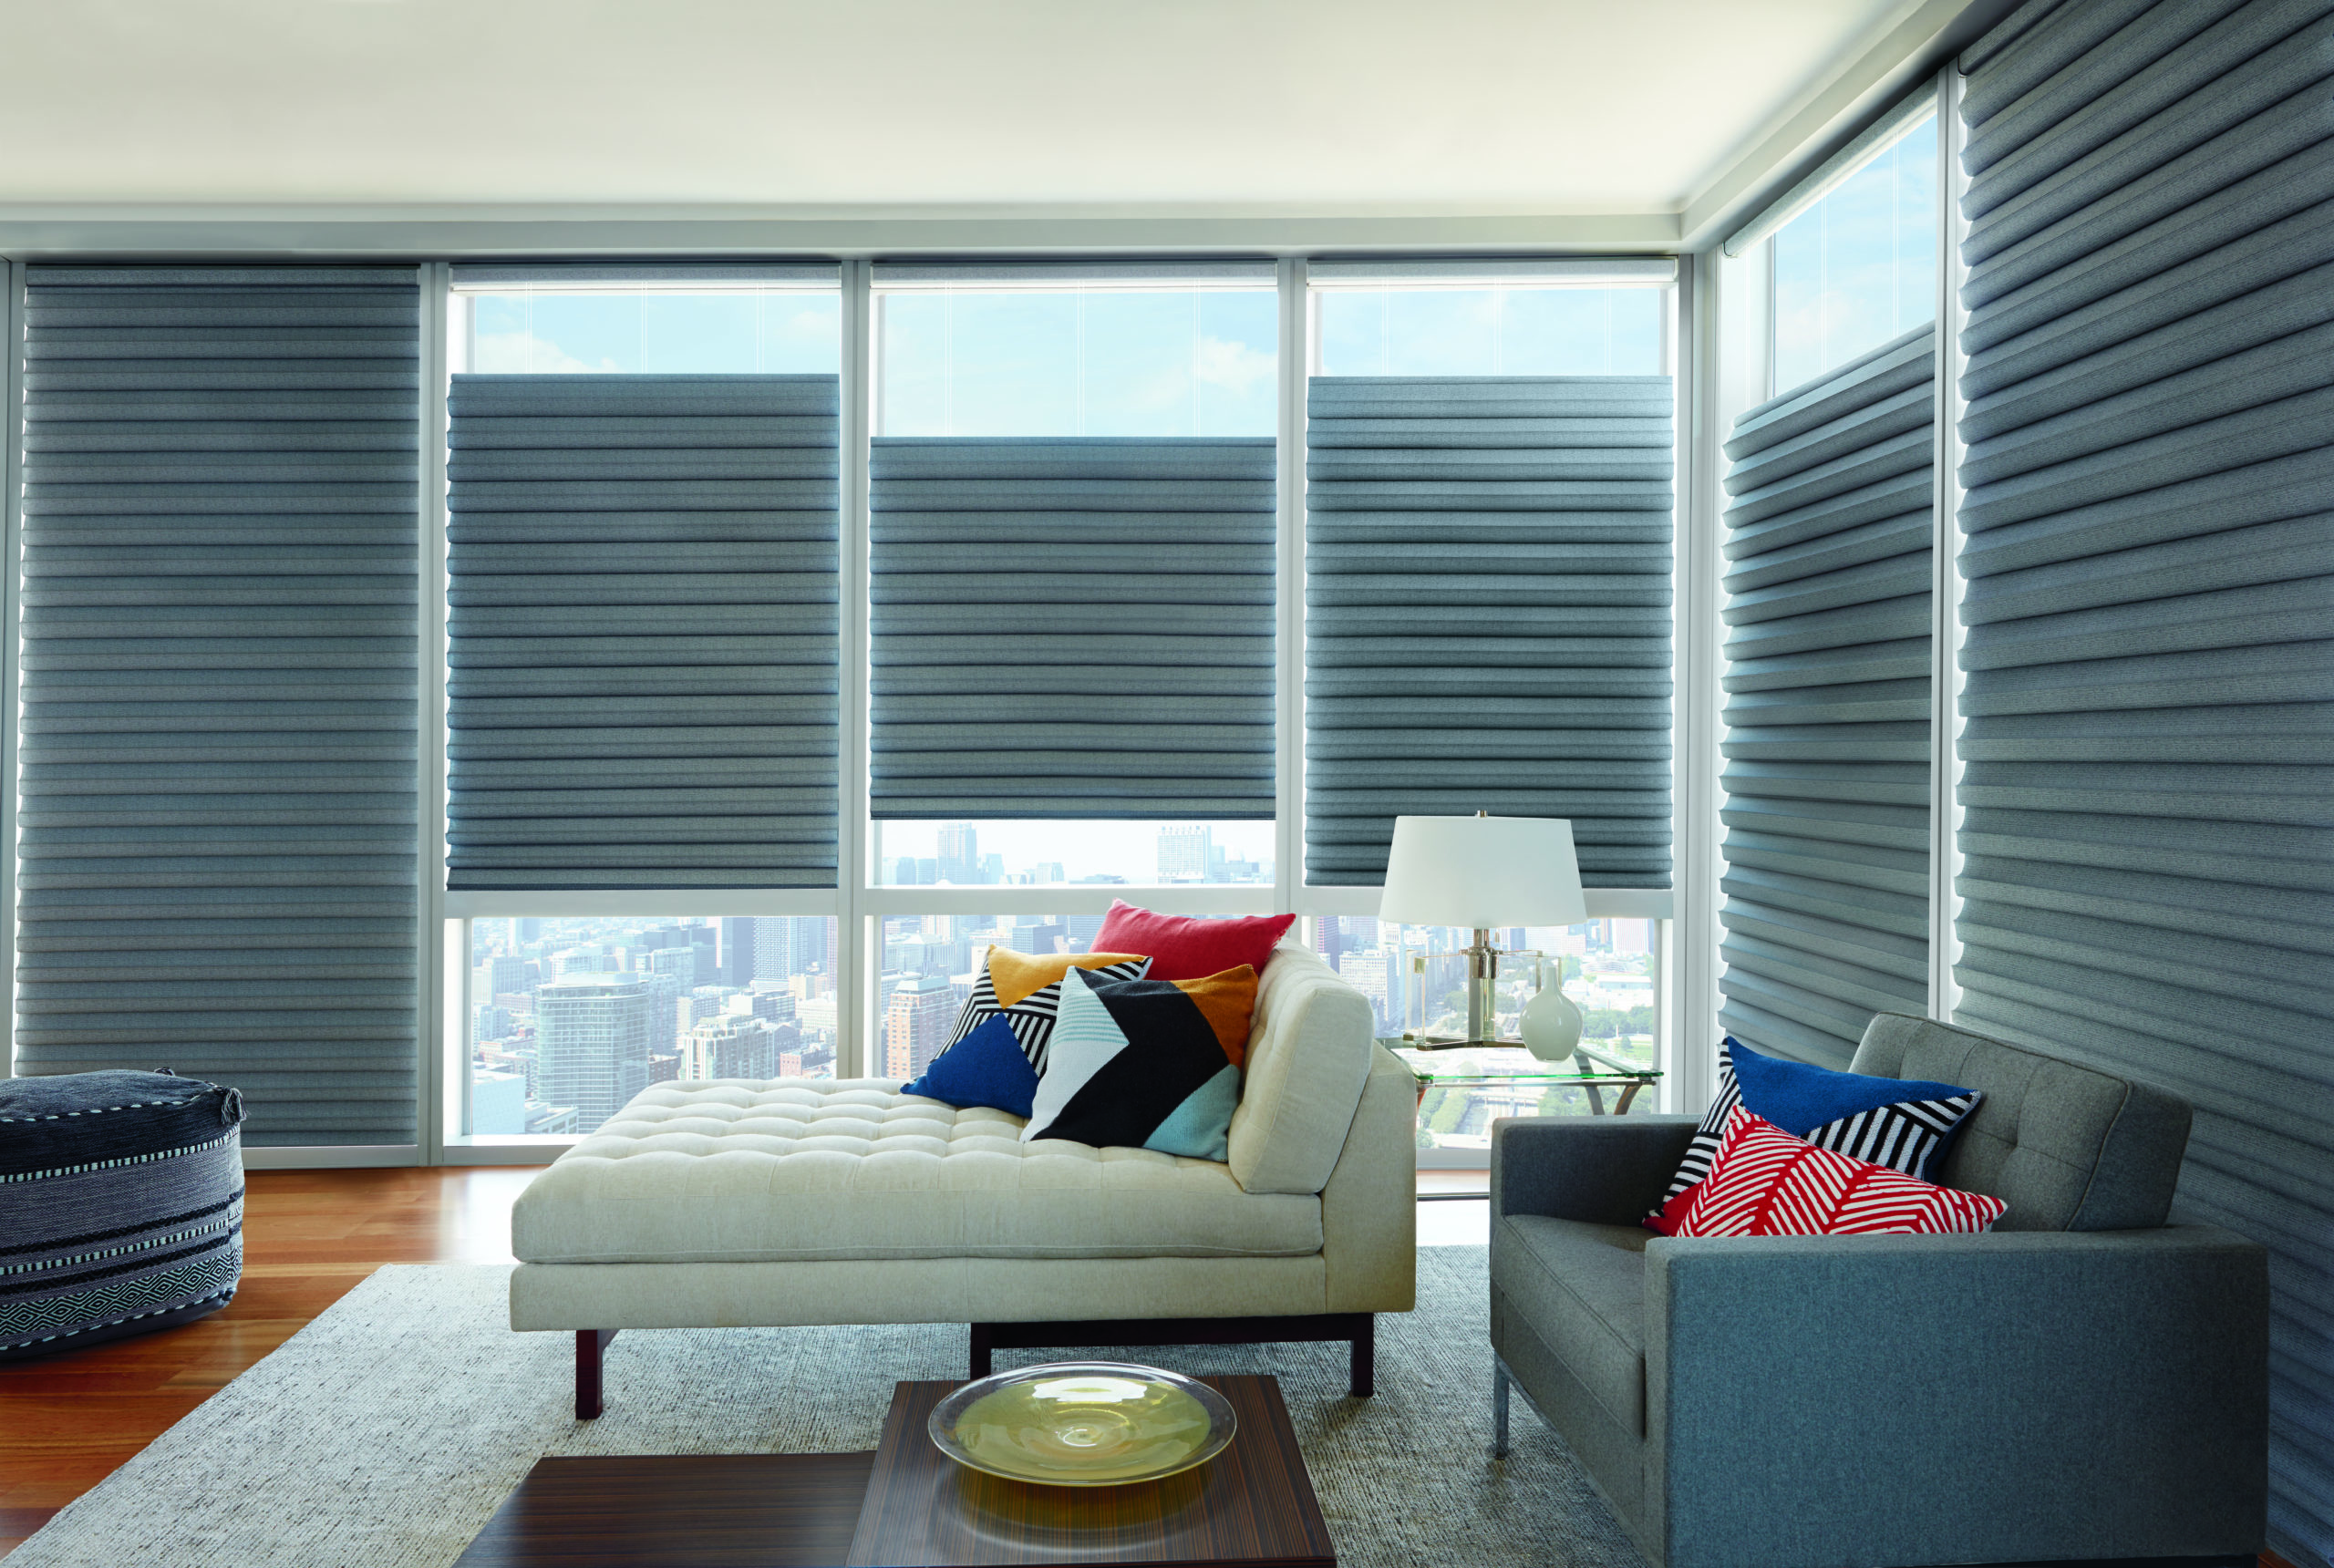 Window Treatments for Privacy and Light